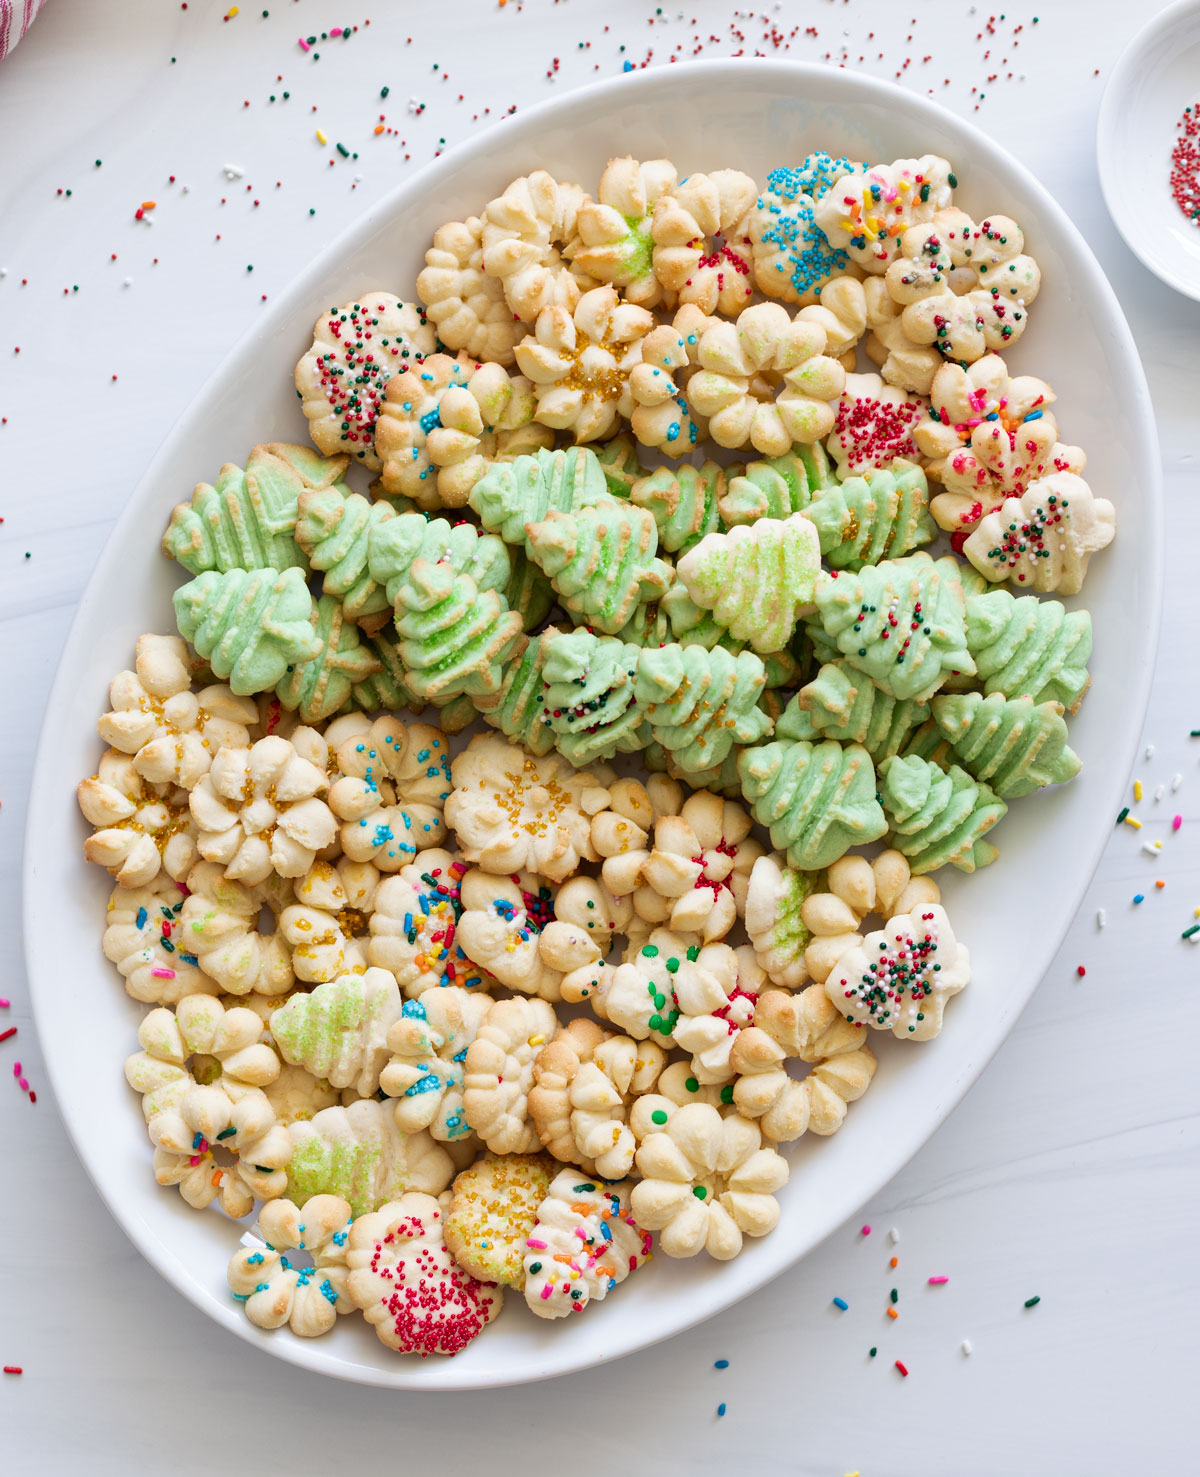 A platter of holiday almond spritz cookies